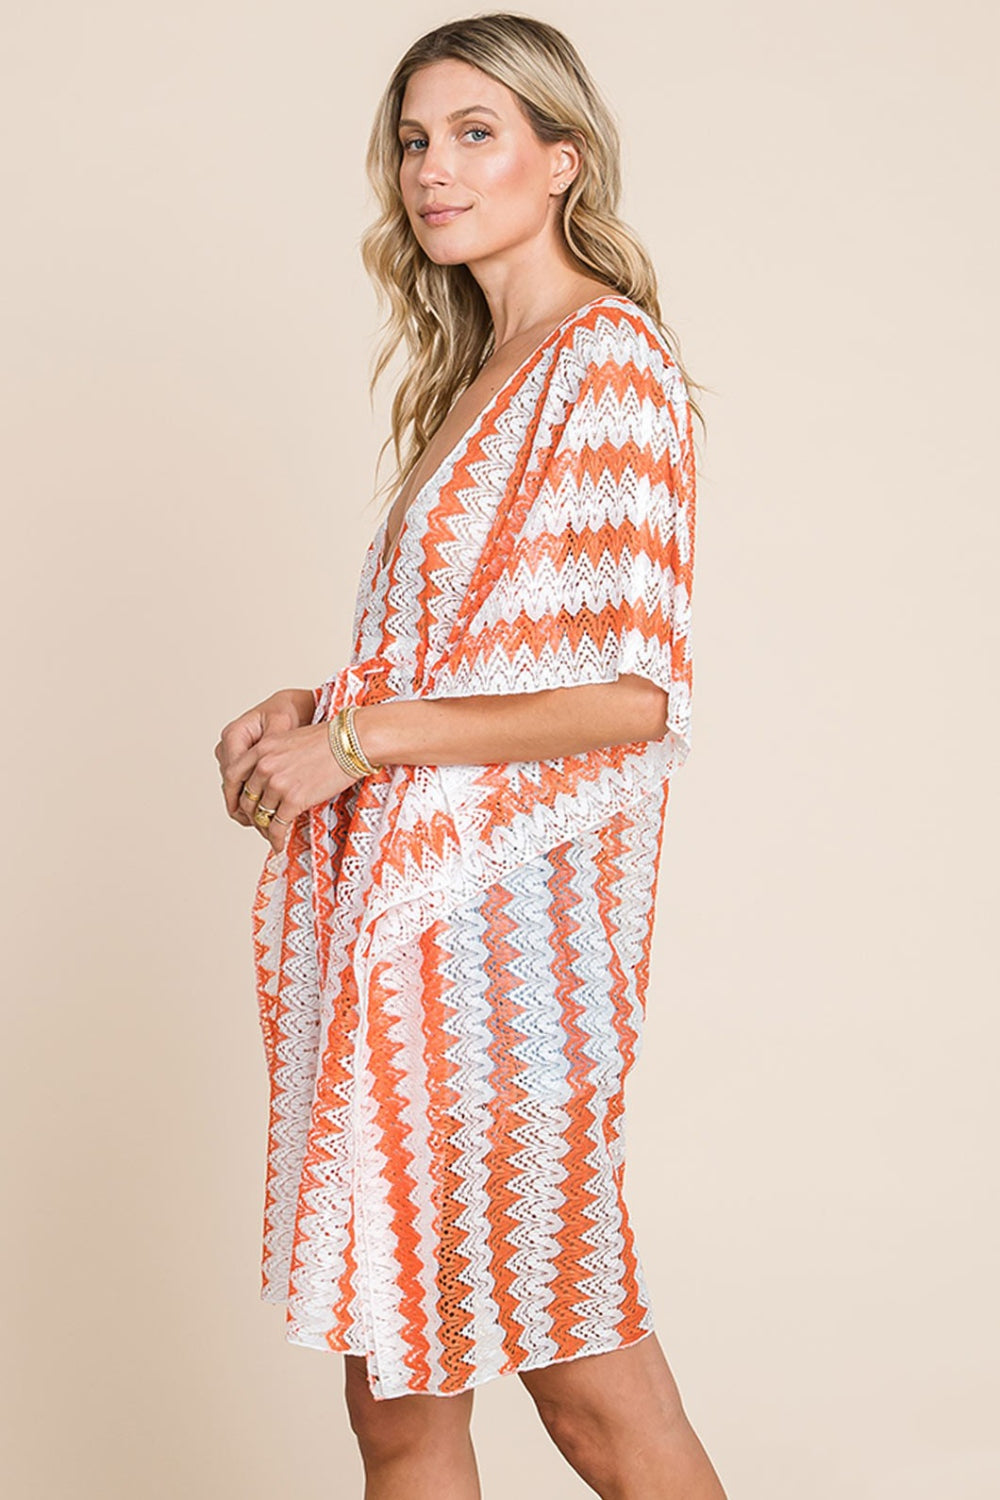 Sunset Vacation  Cotton Bleu by Nu Label Multi Crochet Lace Beach Cover Up Sunset and Swim   